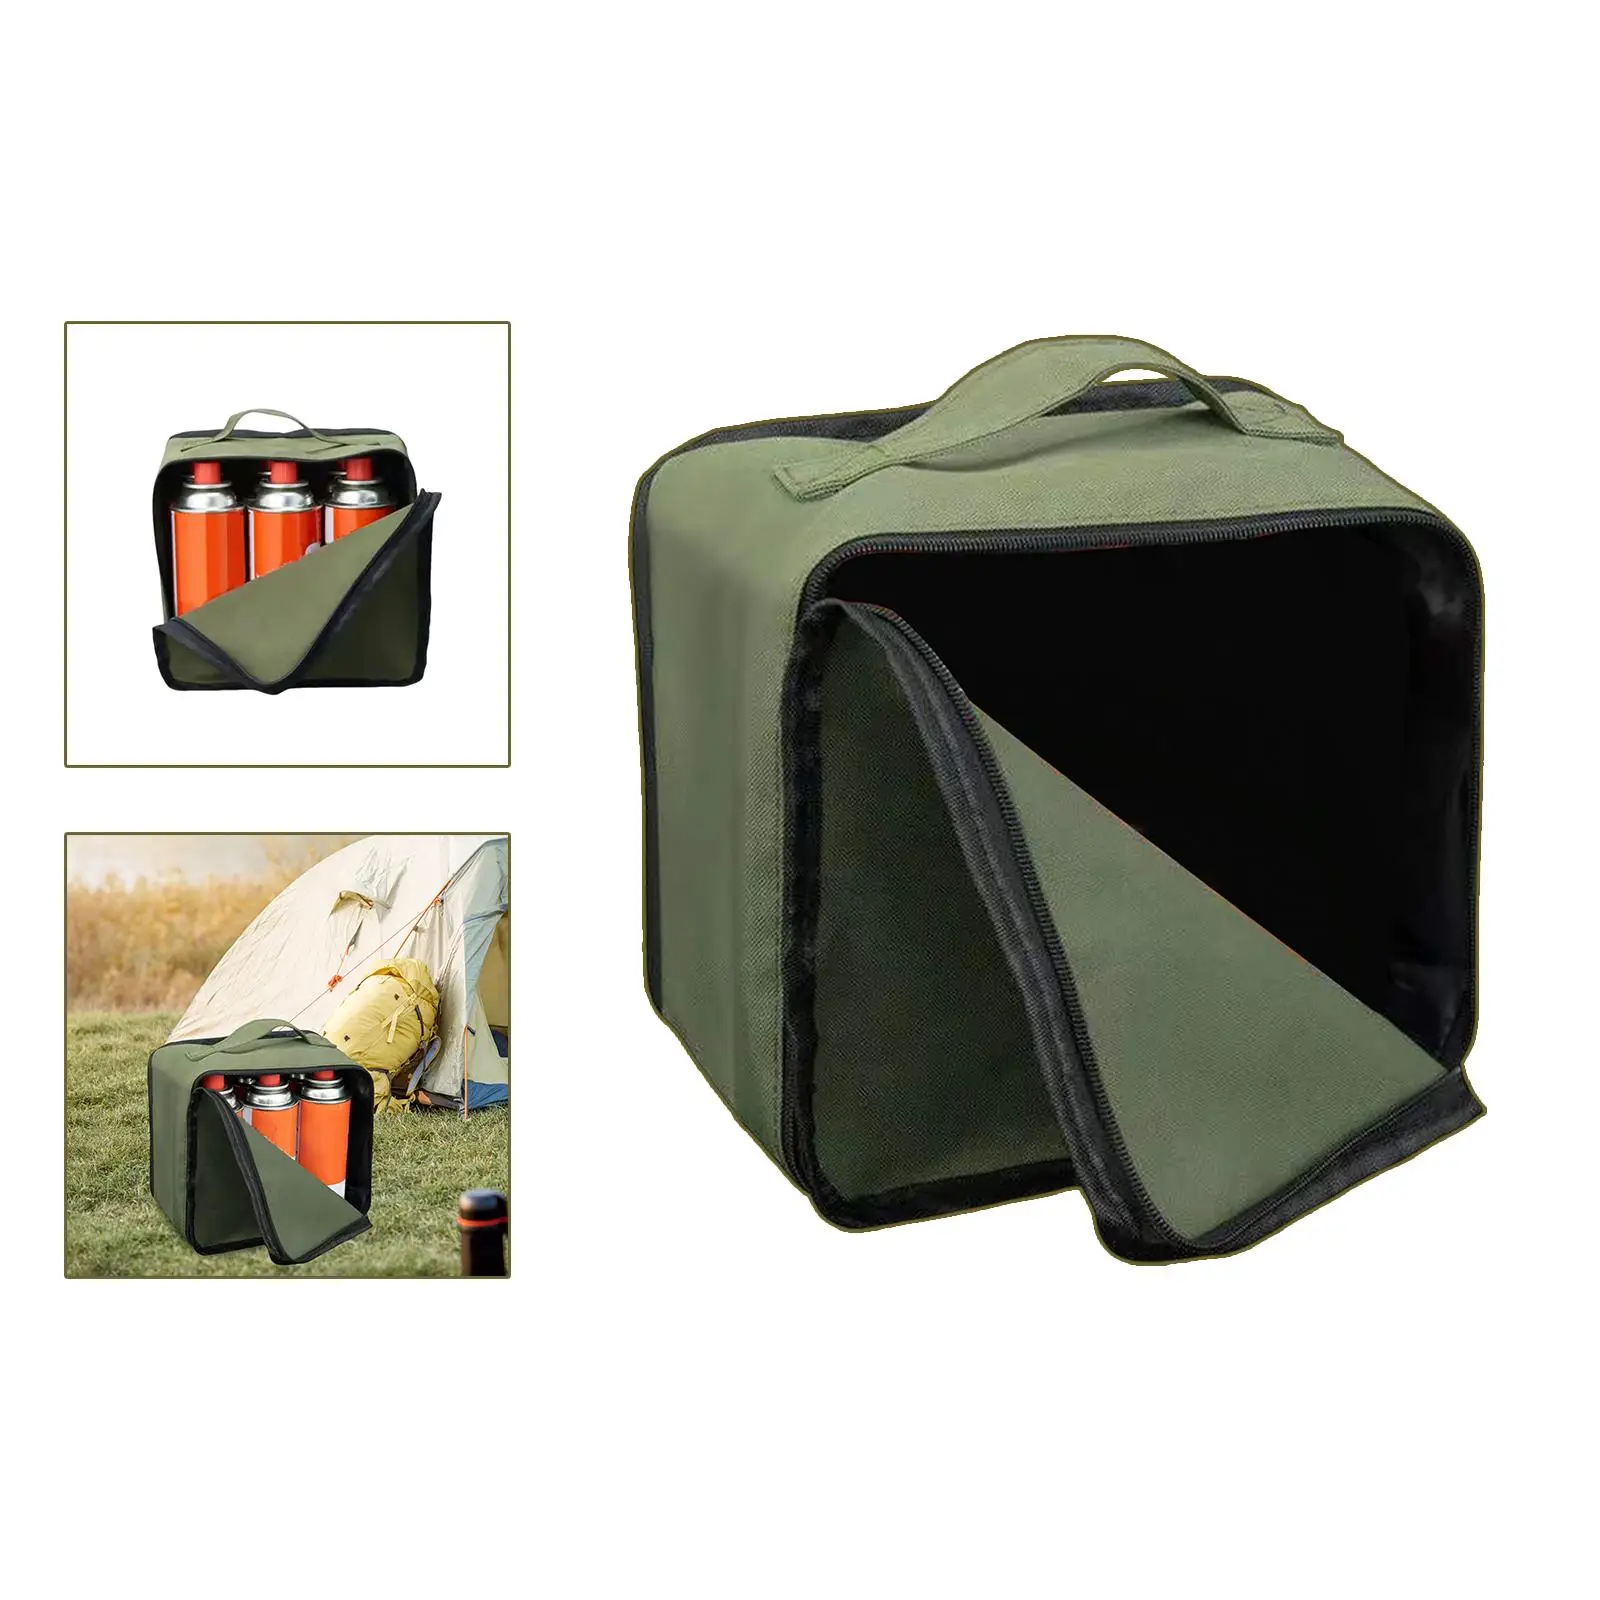 Gas Tank Storage Bags Stable Large Capacity Protect Bag Durable Convenient Tool Bag for Outdoor Picnic Kitchen Backpacking